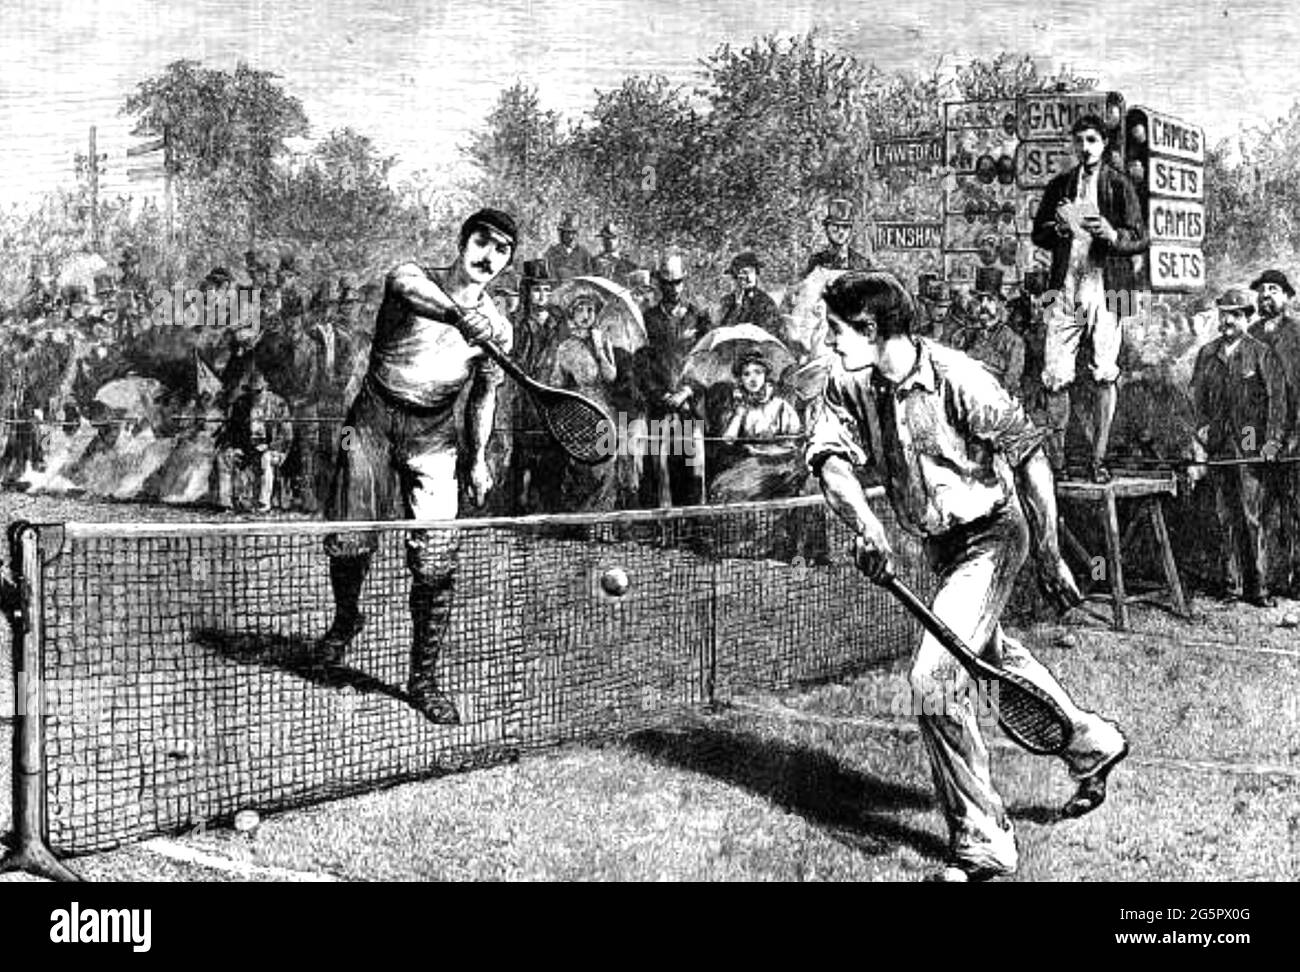 WILLIAM RENSHAW (1861-1904) English tennis player who won twelve major  titles during his career including seven Wimbledon singles titles. Renshaw  is at left in this Graphic magazine engraving of his 1881 clash